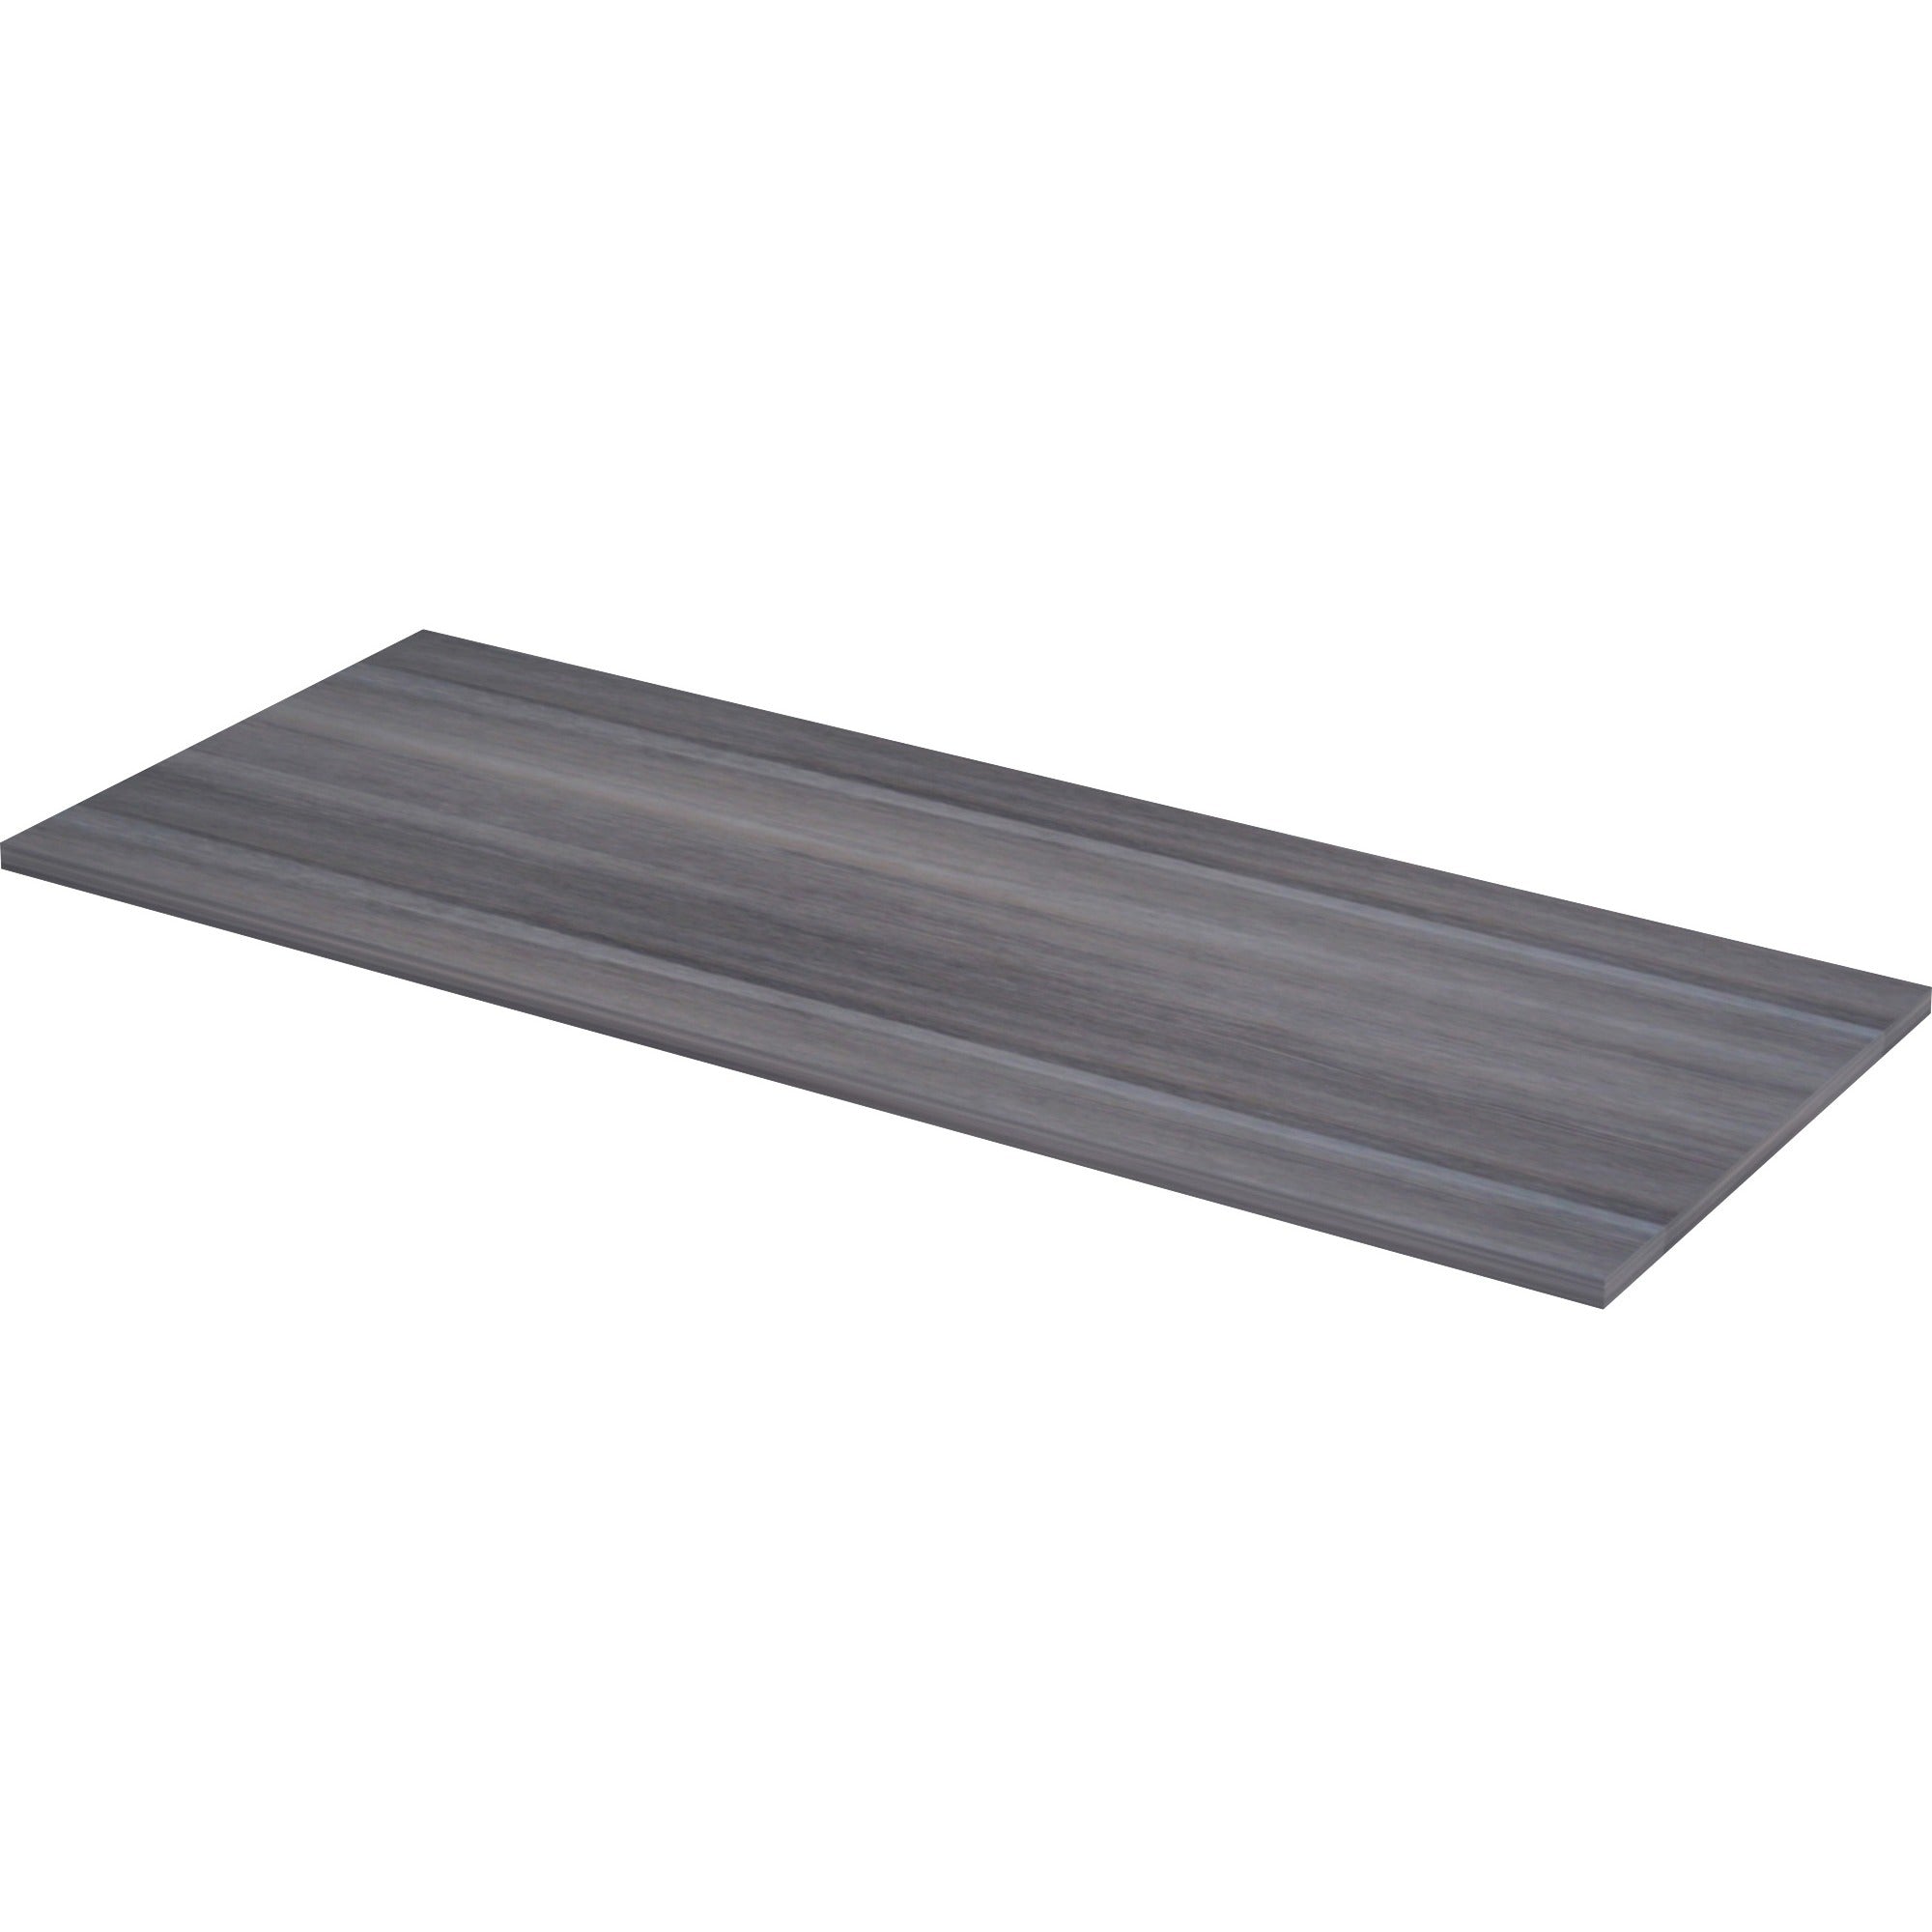 lorell-relevance-series-tabletop-599-x-236-x-1-table-top-straight-edge-finish-charcoal-laminate_llr16202 - 1